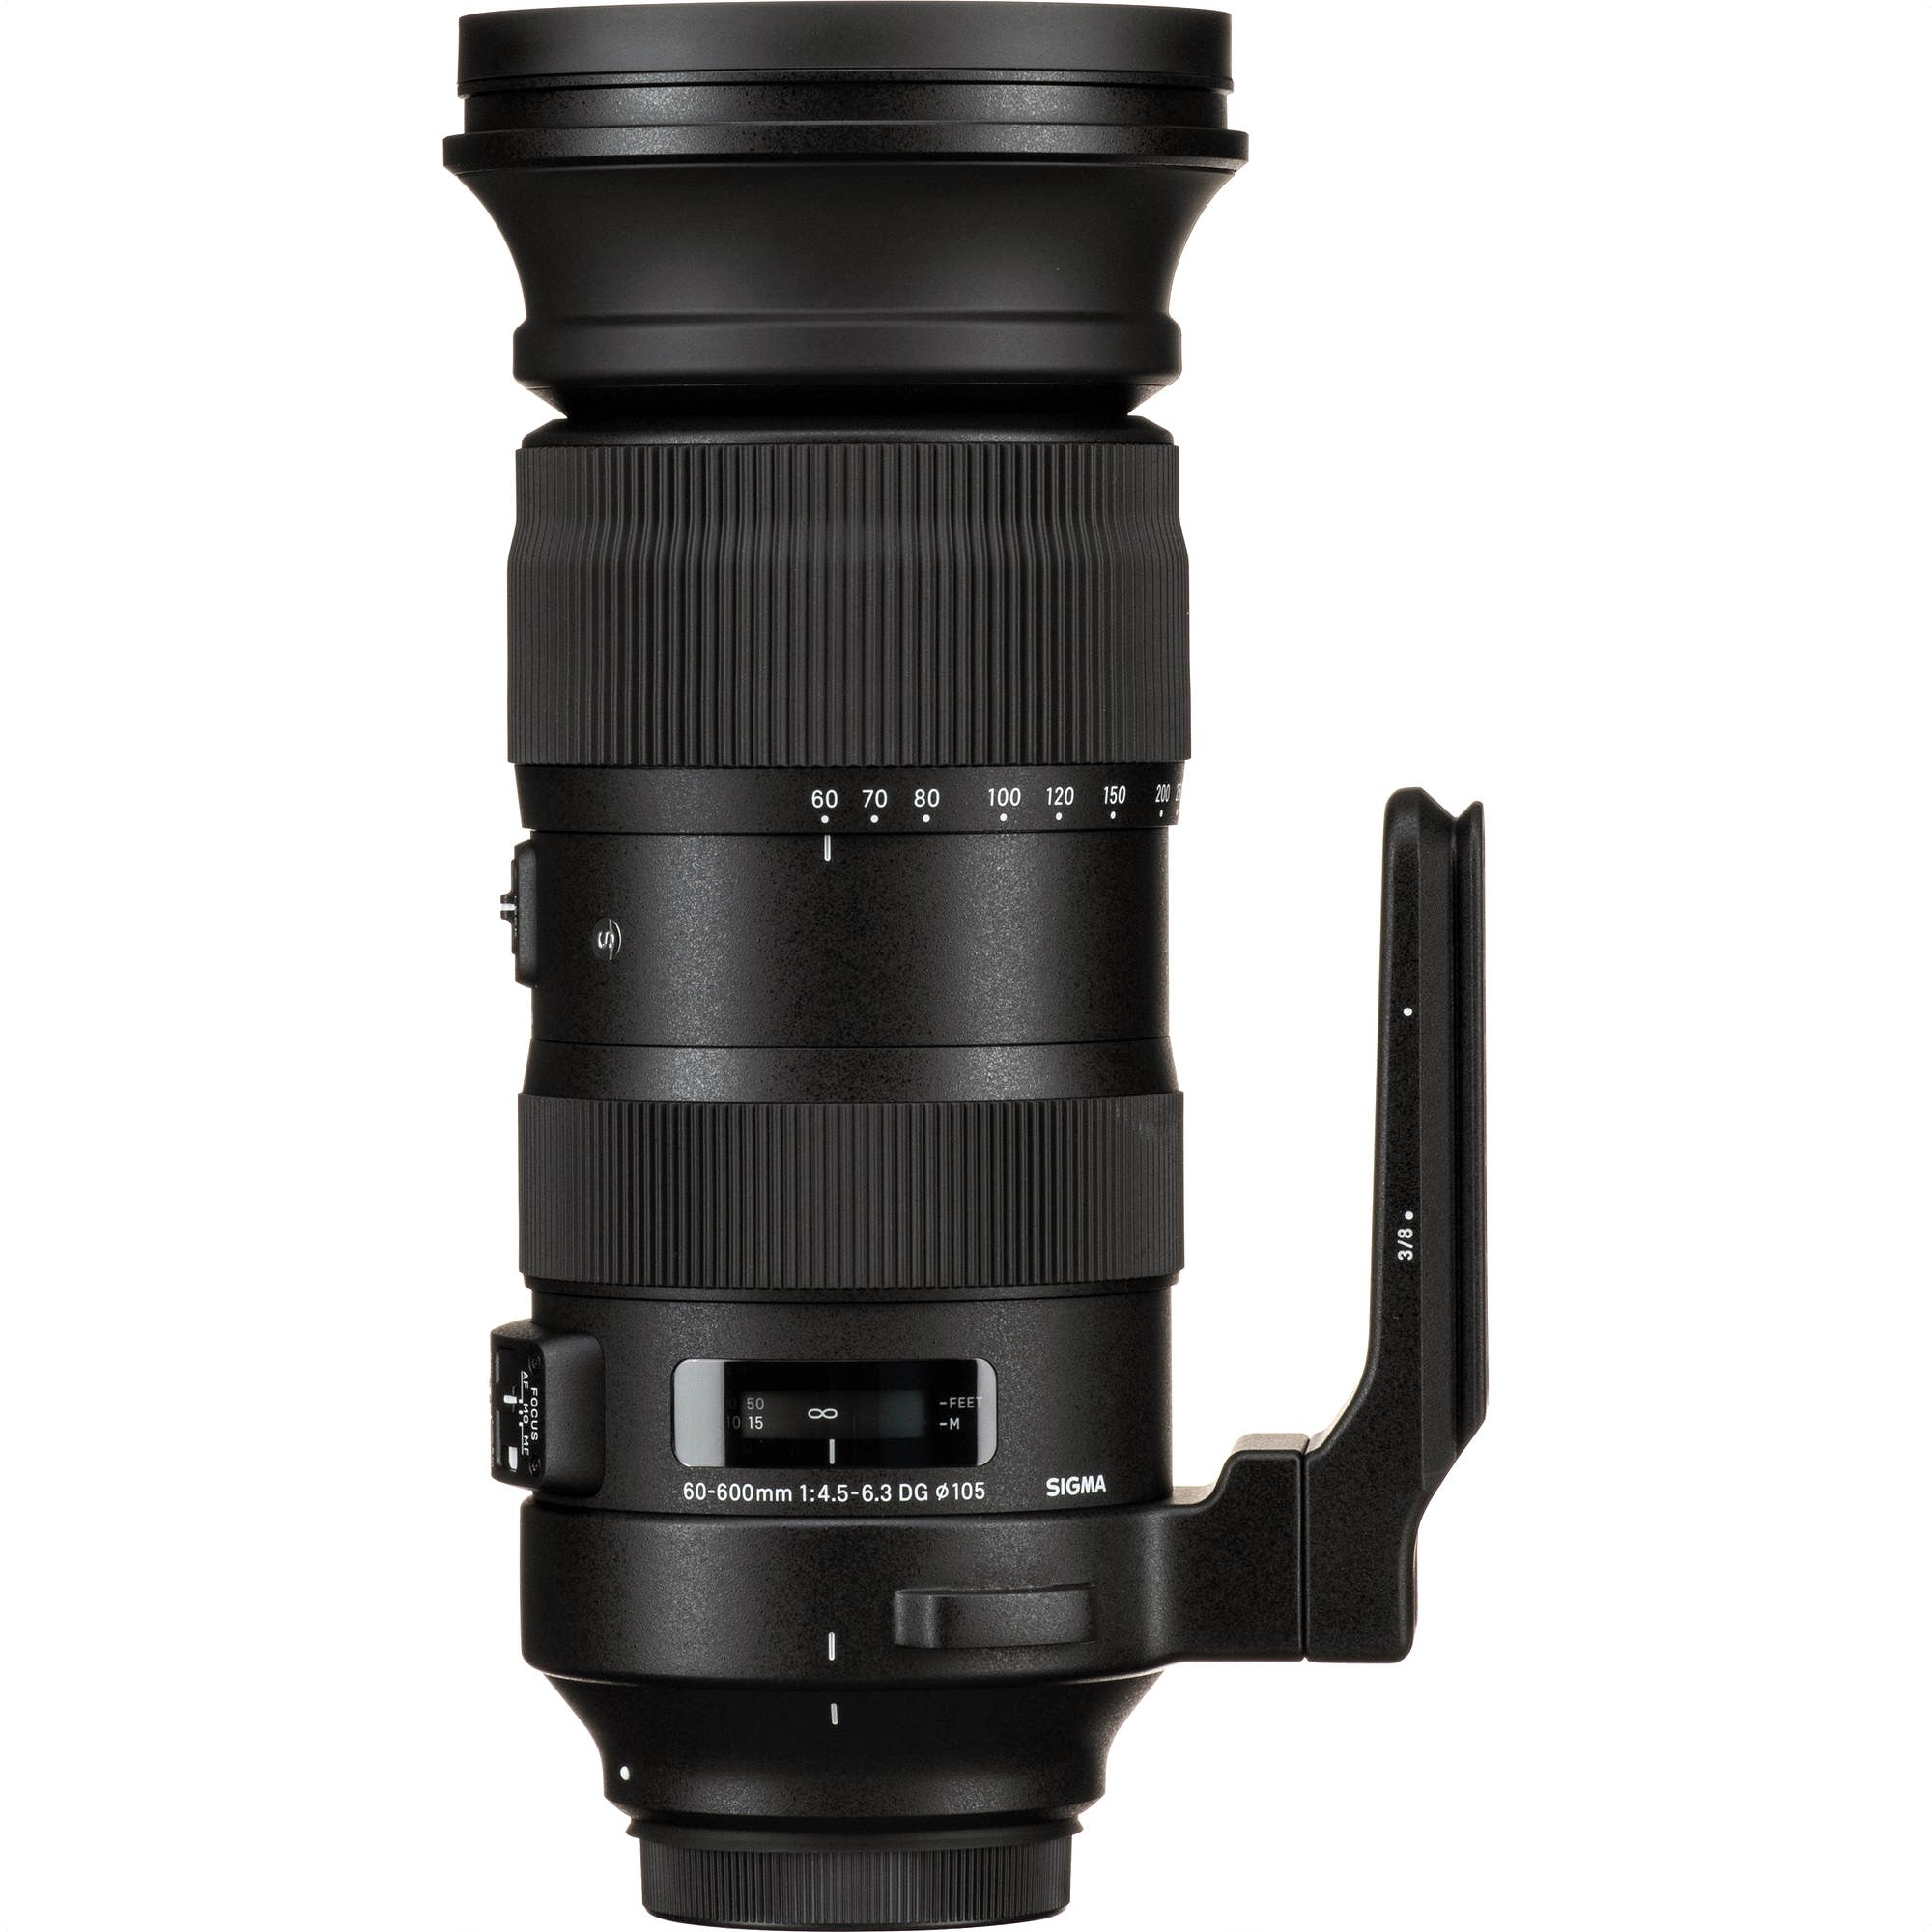 Sigma 60-600mm F4.5-6.3 DG OS HSM Sports Lens for Sigma SA with Attached Tripod Mount on the Right